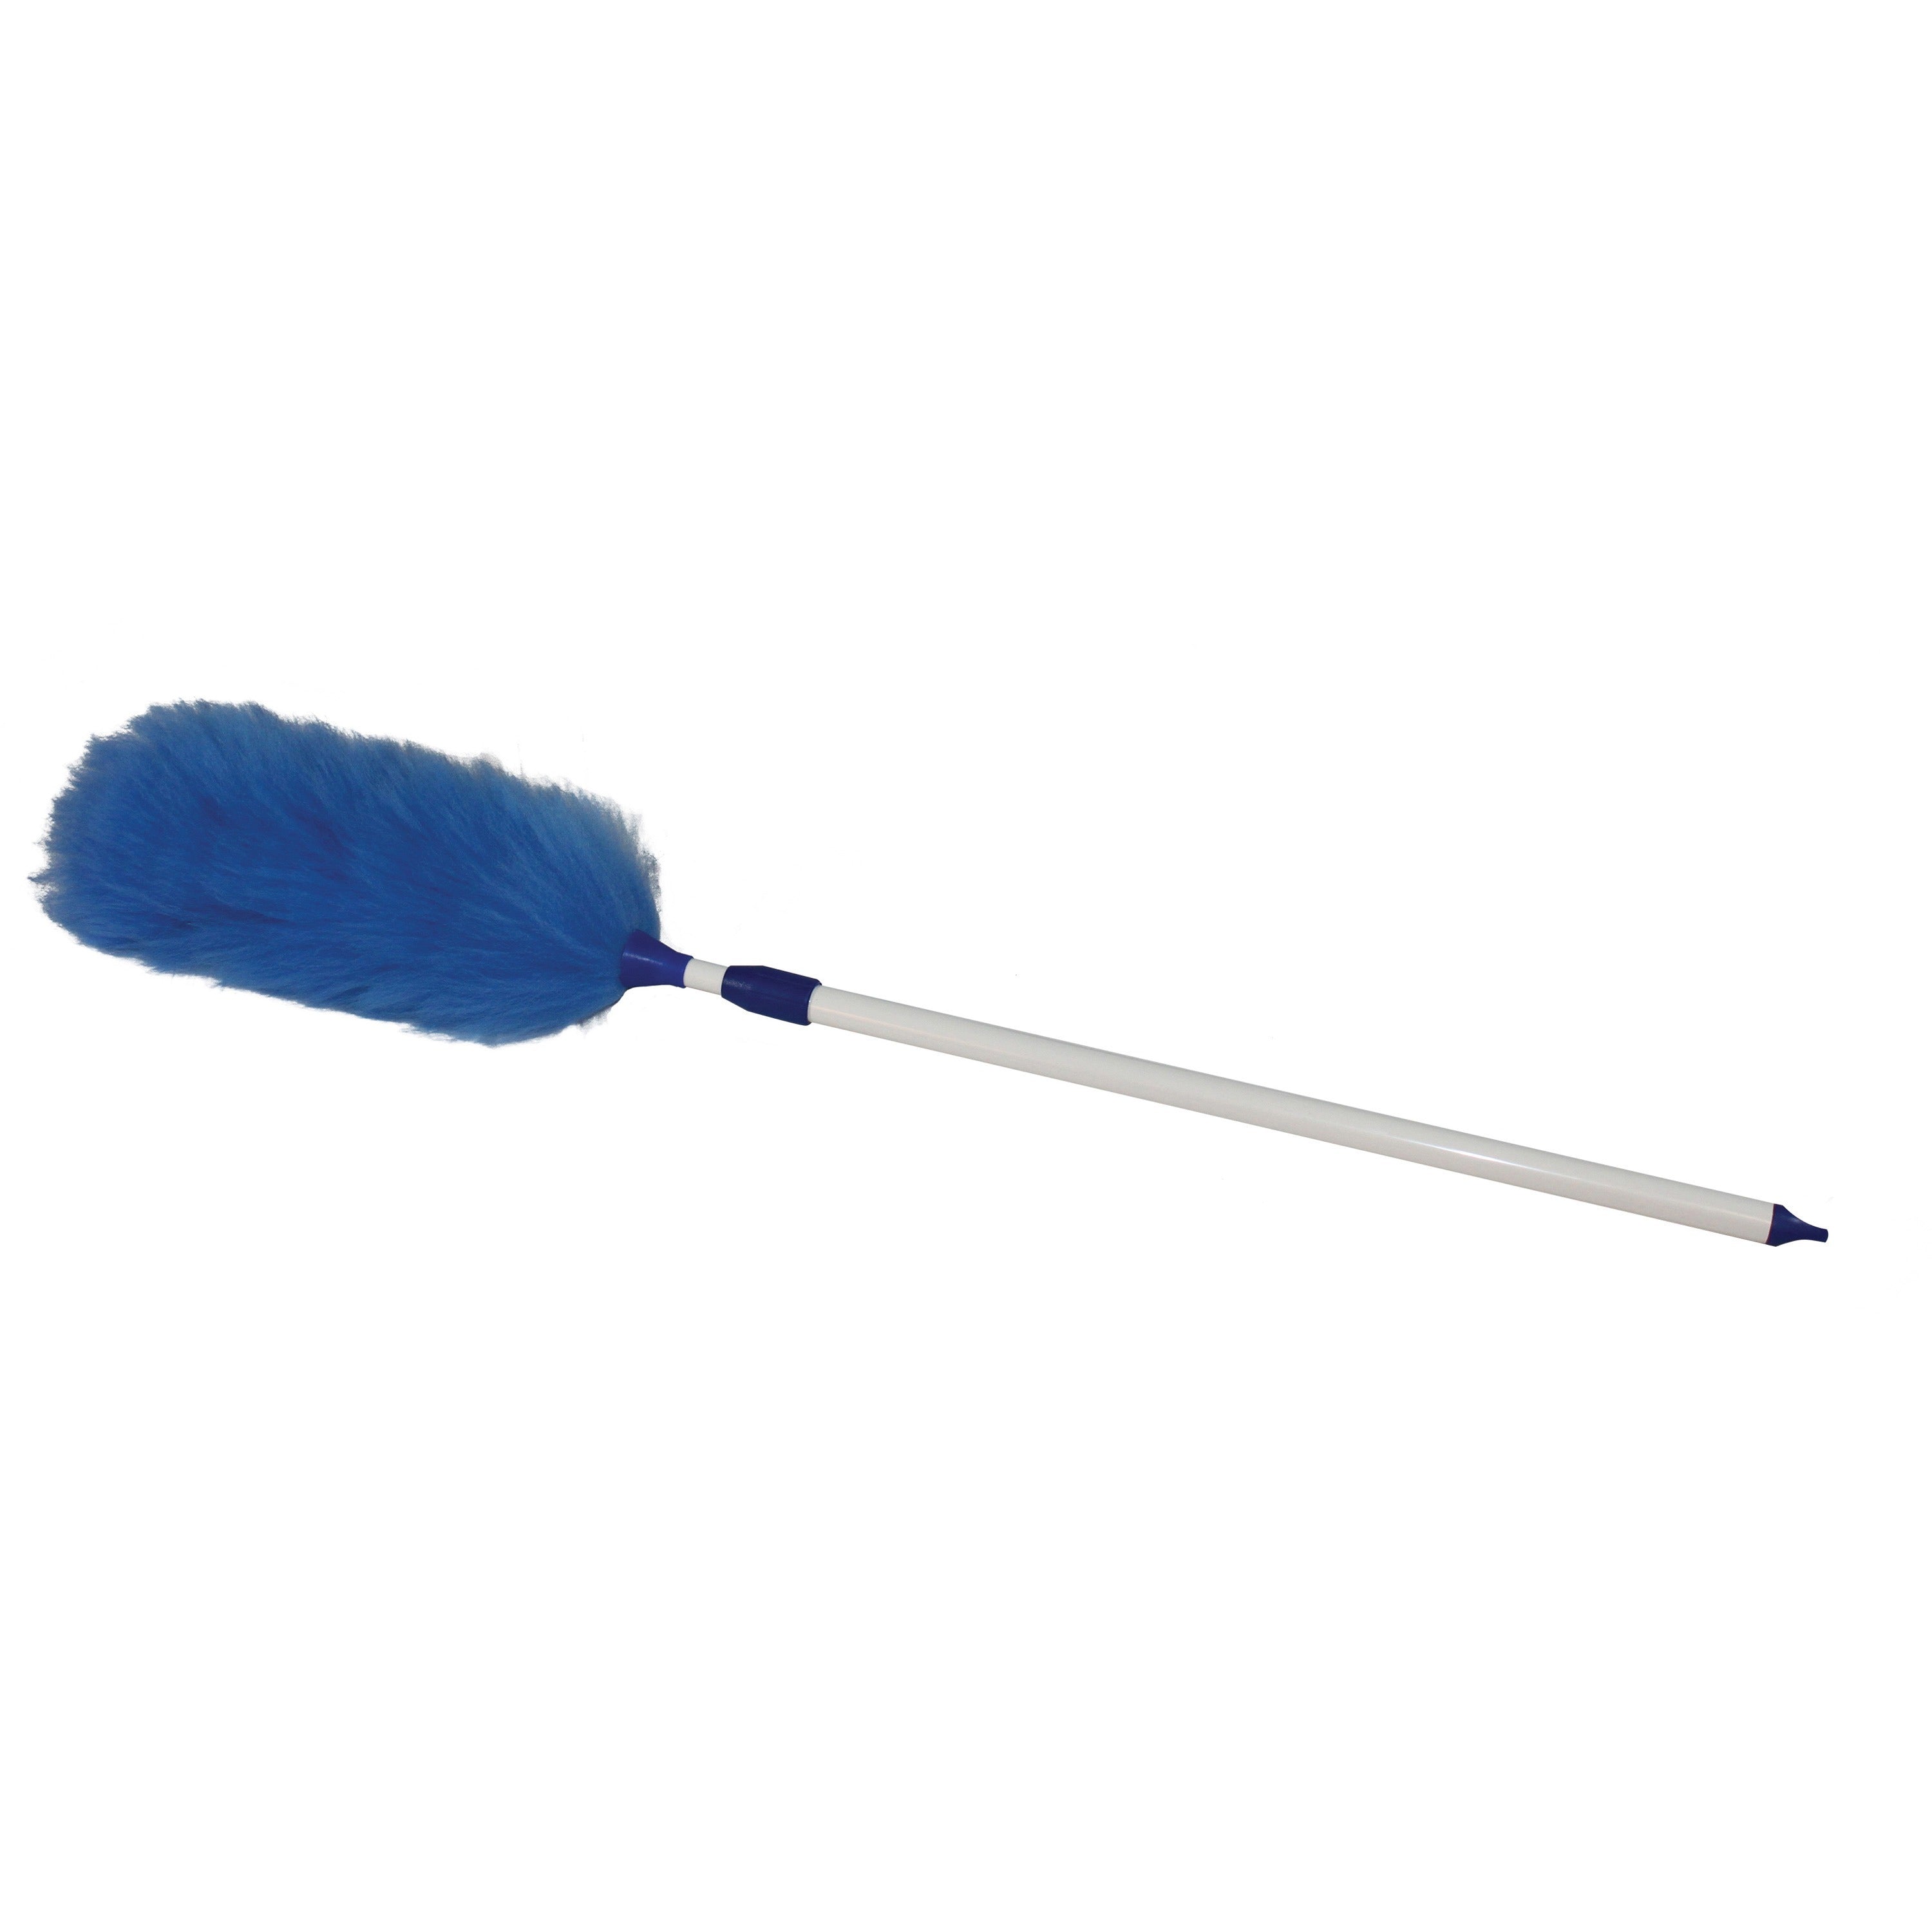 impact-telescopic-lambswool-duster-30-overall-length-white-handle-12-carton-assorted_imp3105ct - 1